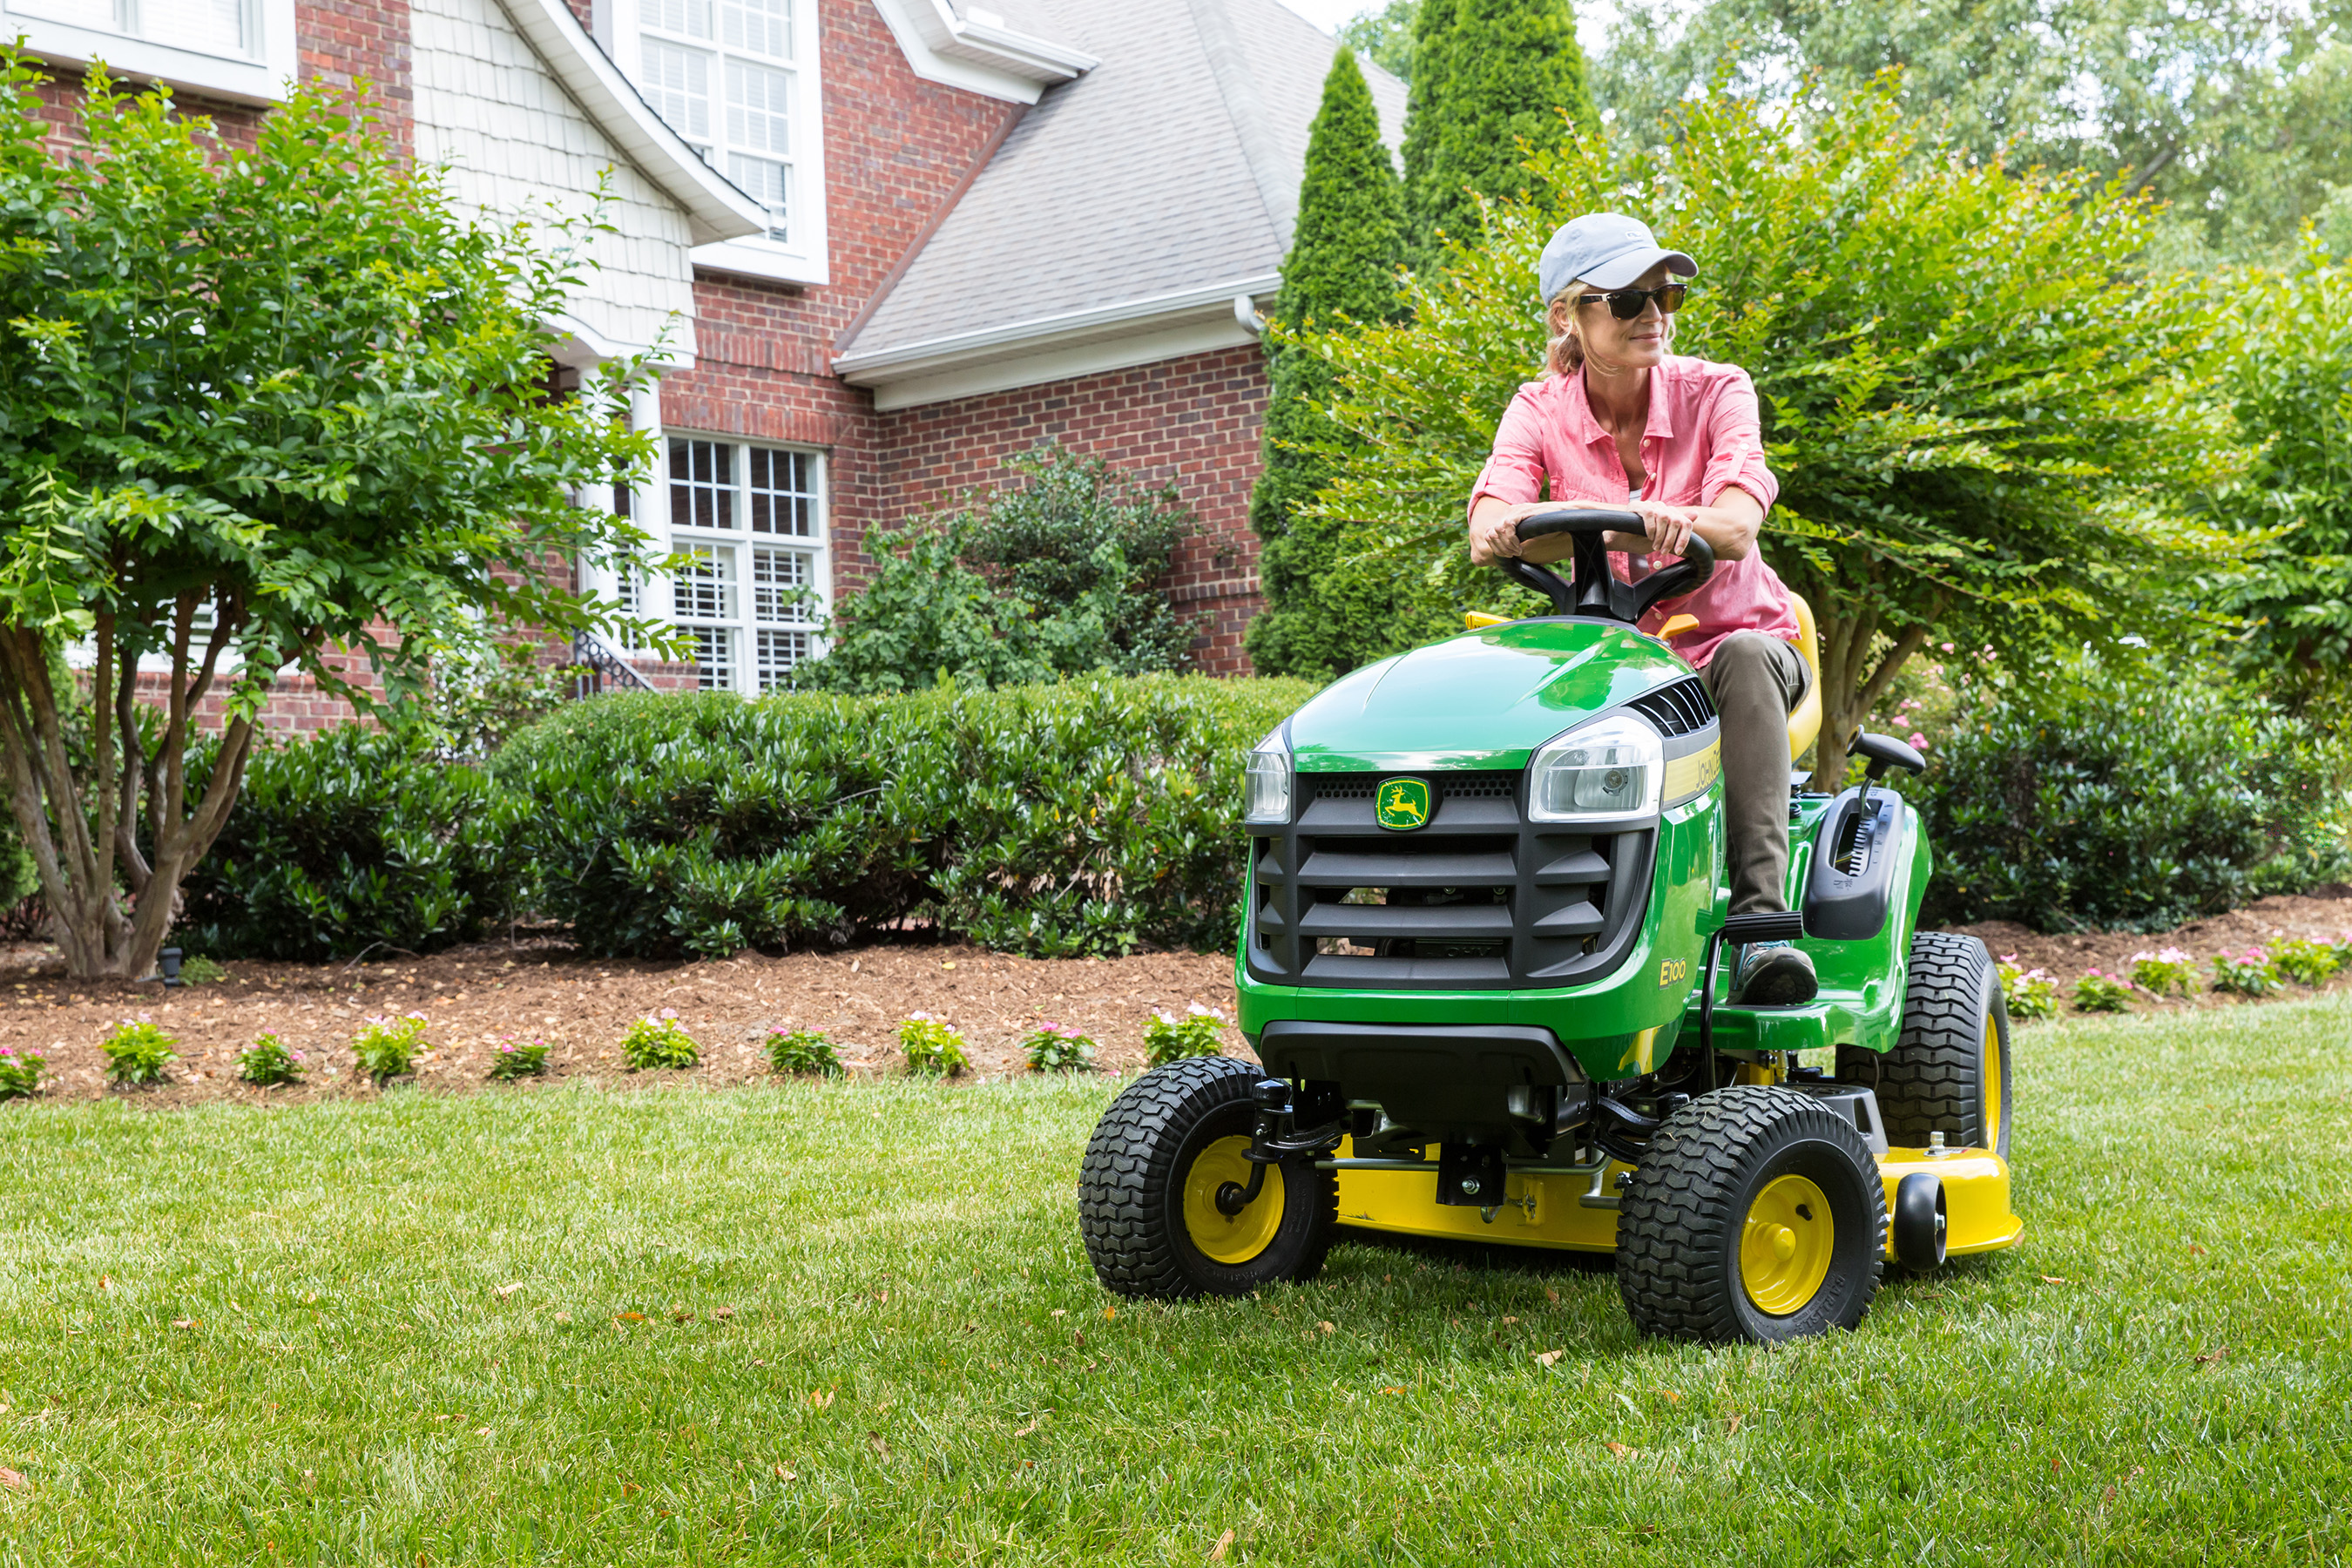 John Deere Provides Comfort and Ease of Use with New Lawn Tractors